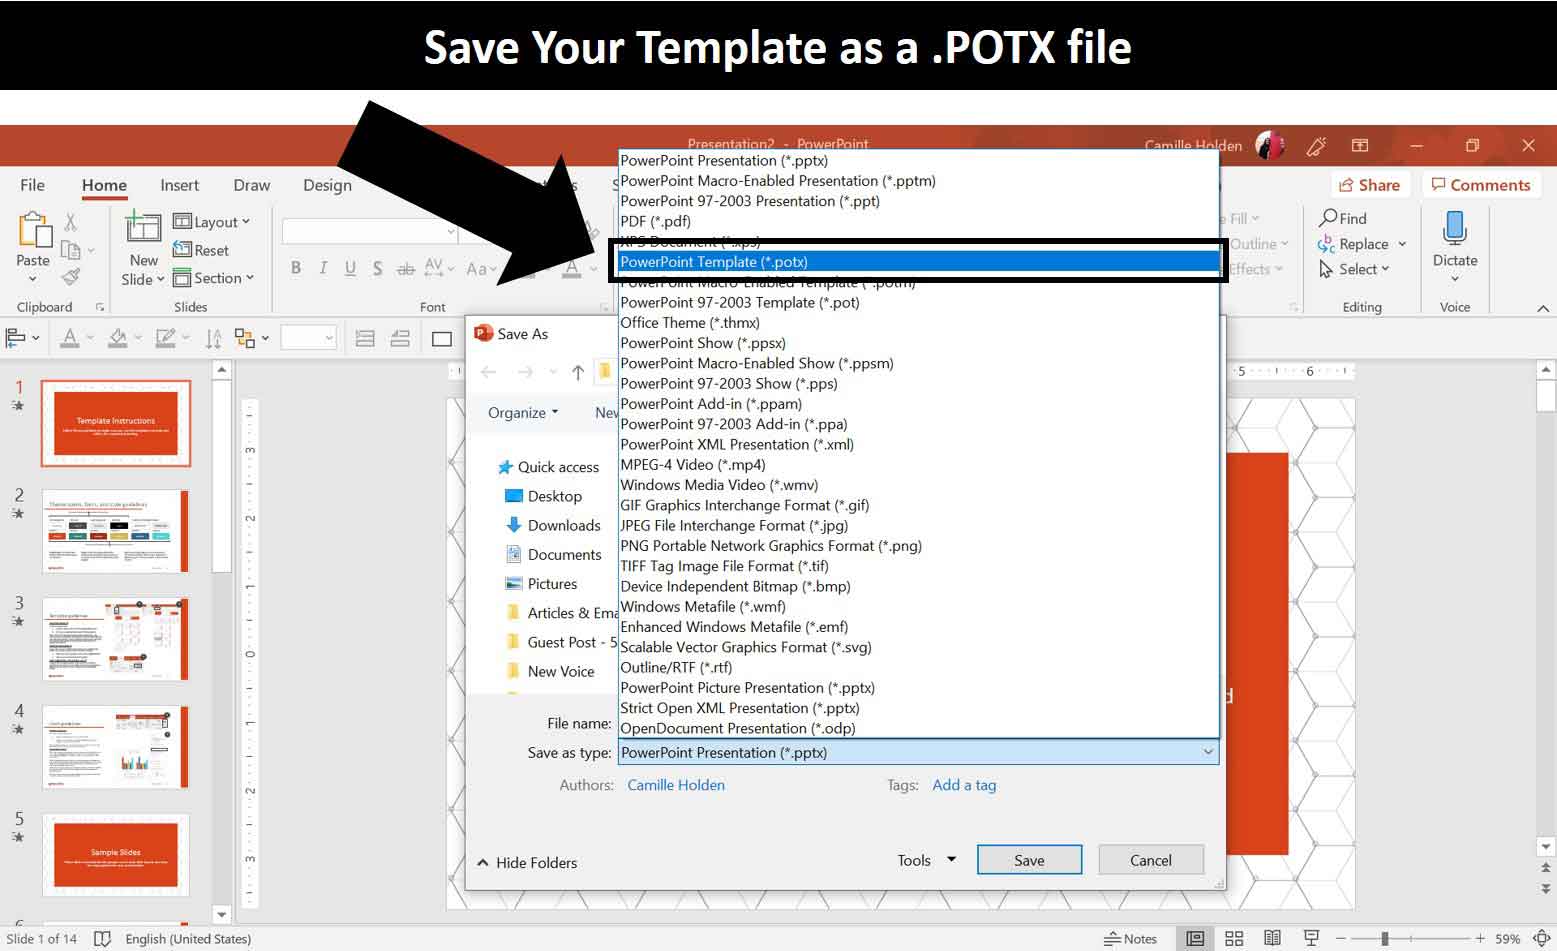 Save your PowerPoint template as a .potx file so that it functions properly